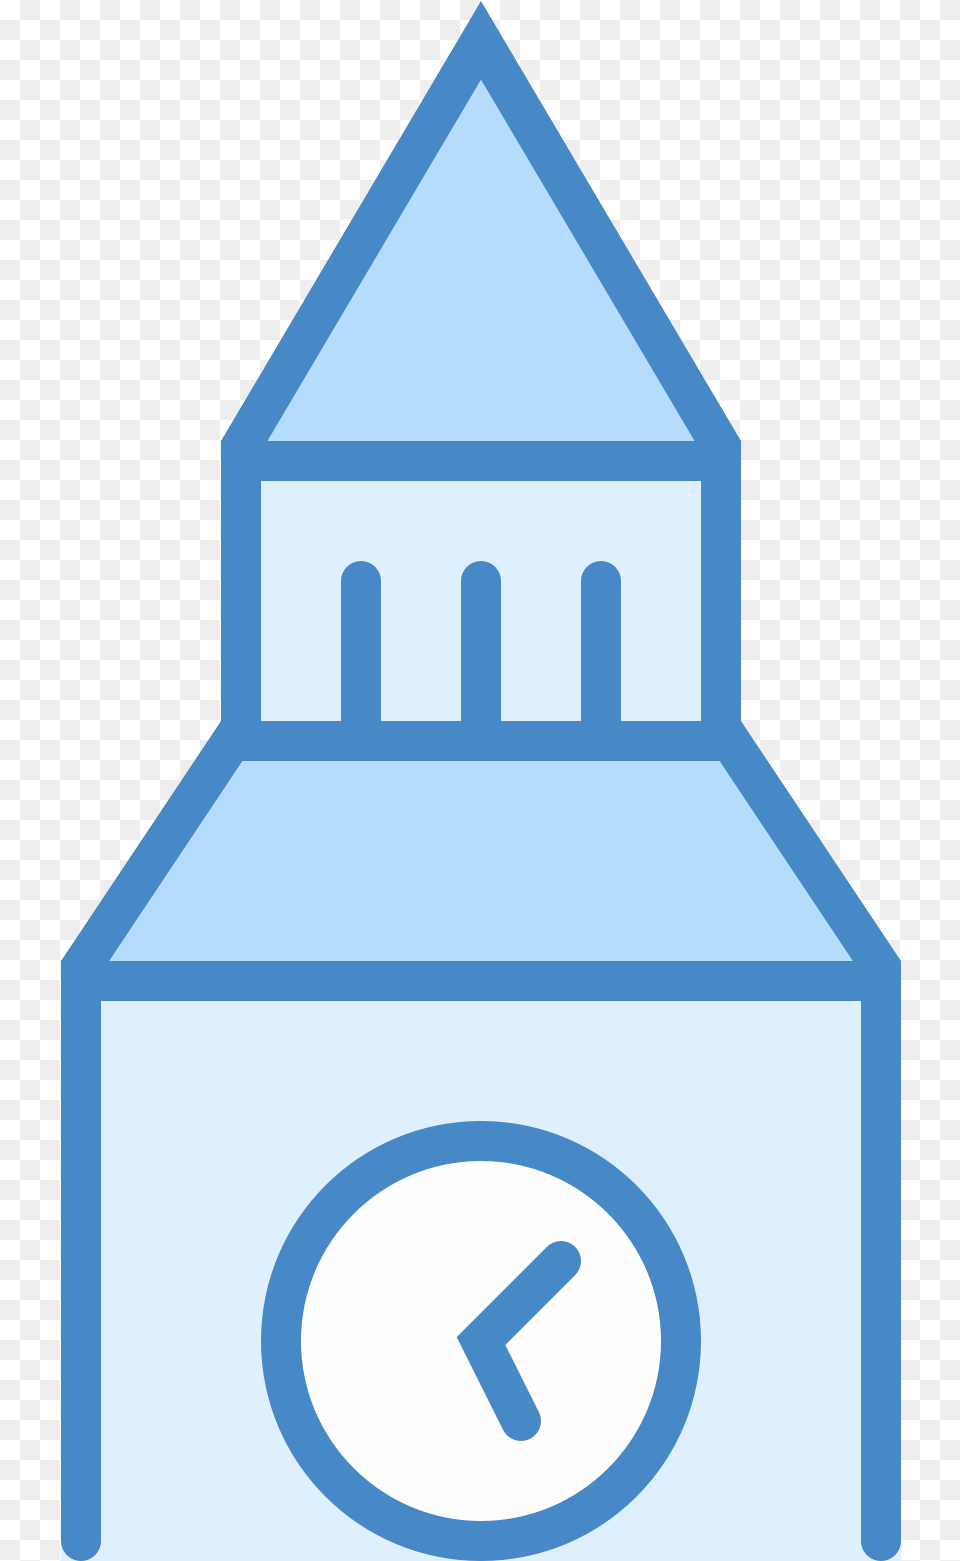 Big Ben Icon Big Ben, Architecture, Bell Tower, Building, Clock Tower Png Image